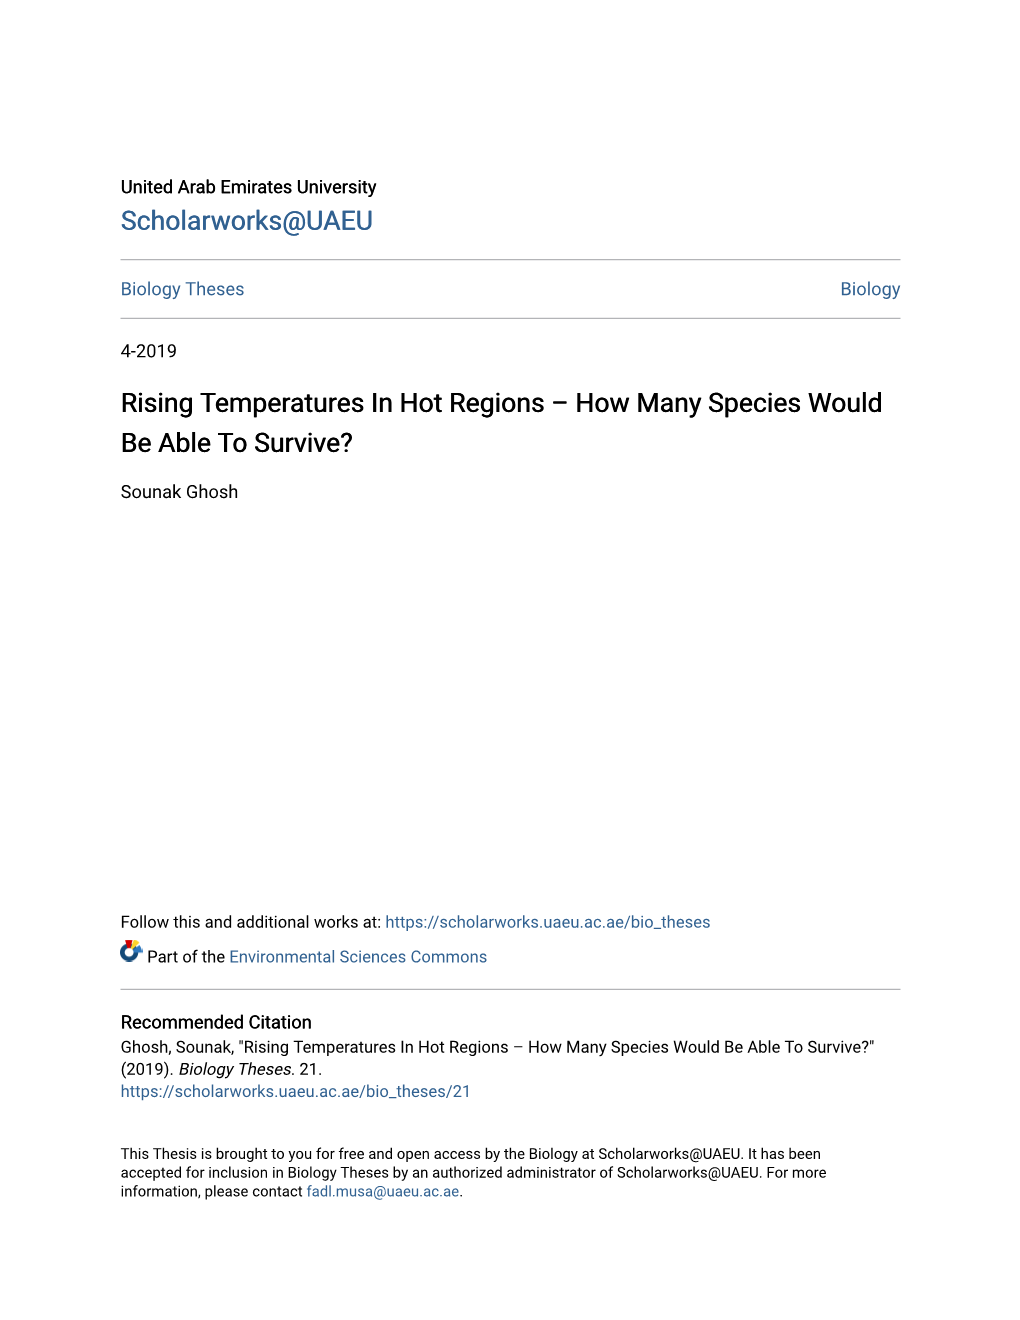 Rising Temperatures in Hot Regions – How Many Species Would Be Able to Survive?